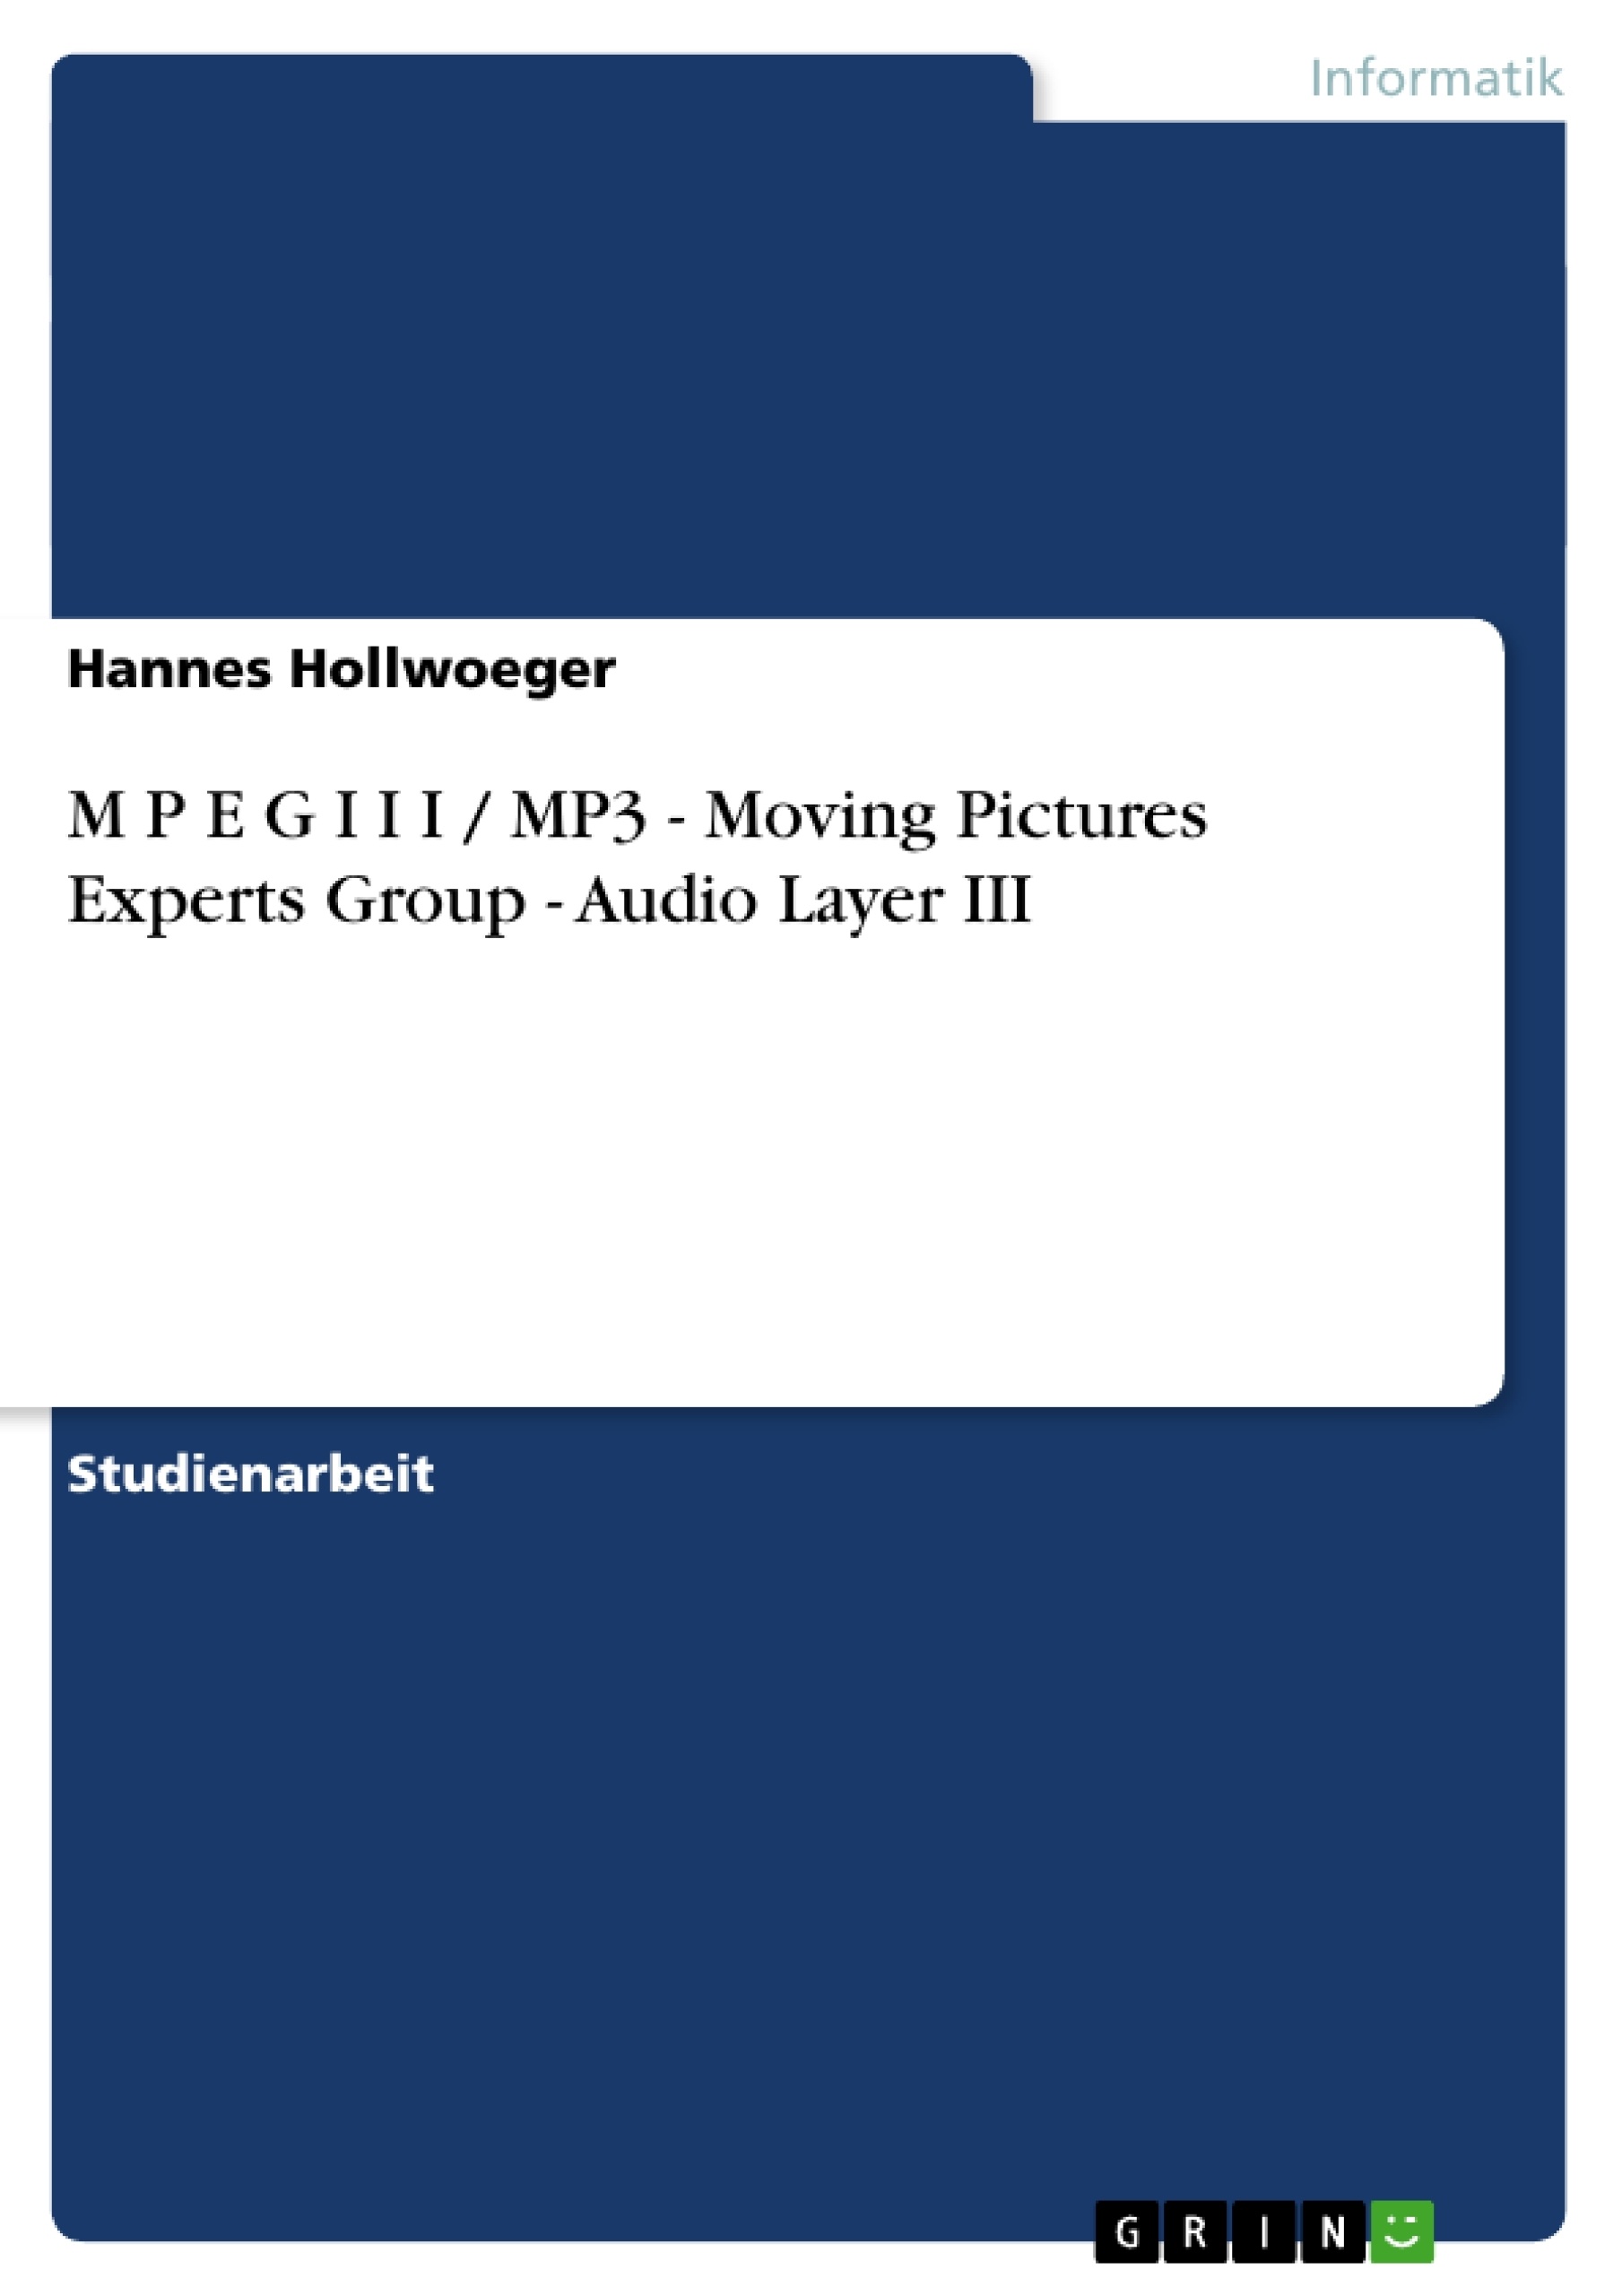 Titel: M P E G I I I / MP3 - Moving Pictures Experts Group - Audio Layer III